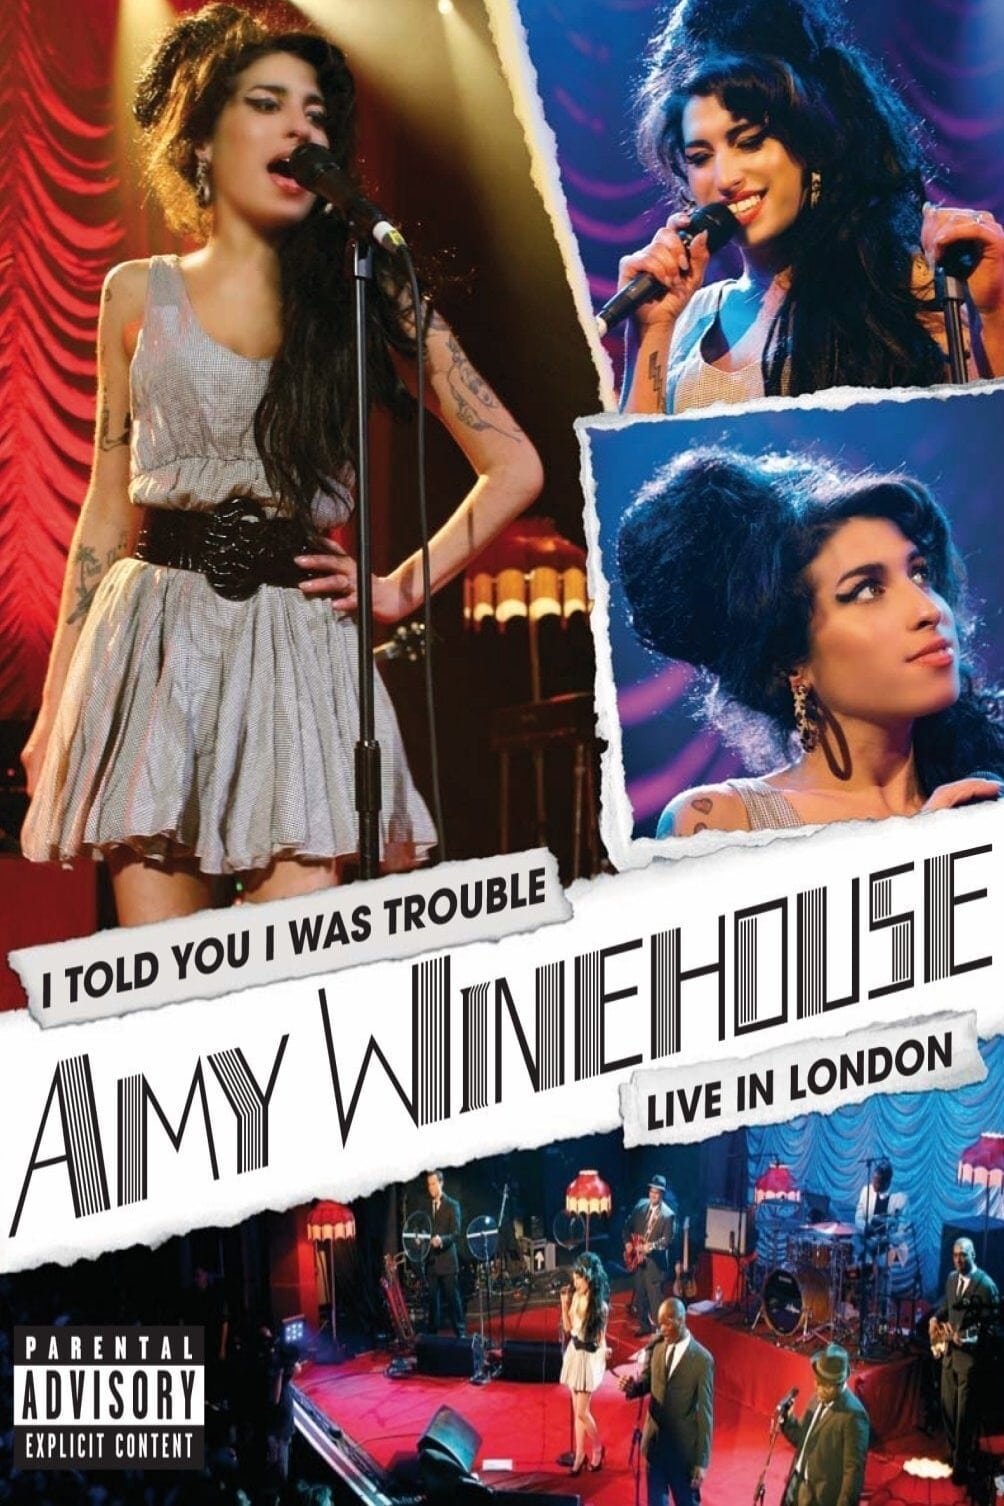 Amy Winehouse - I Told You I Was Trouble - Live in London (2007)